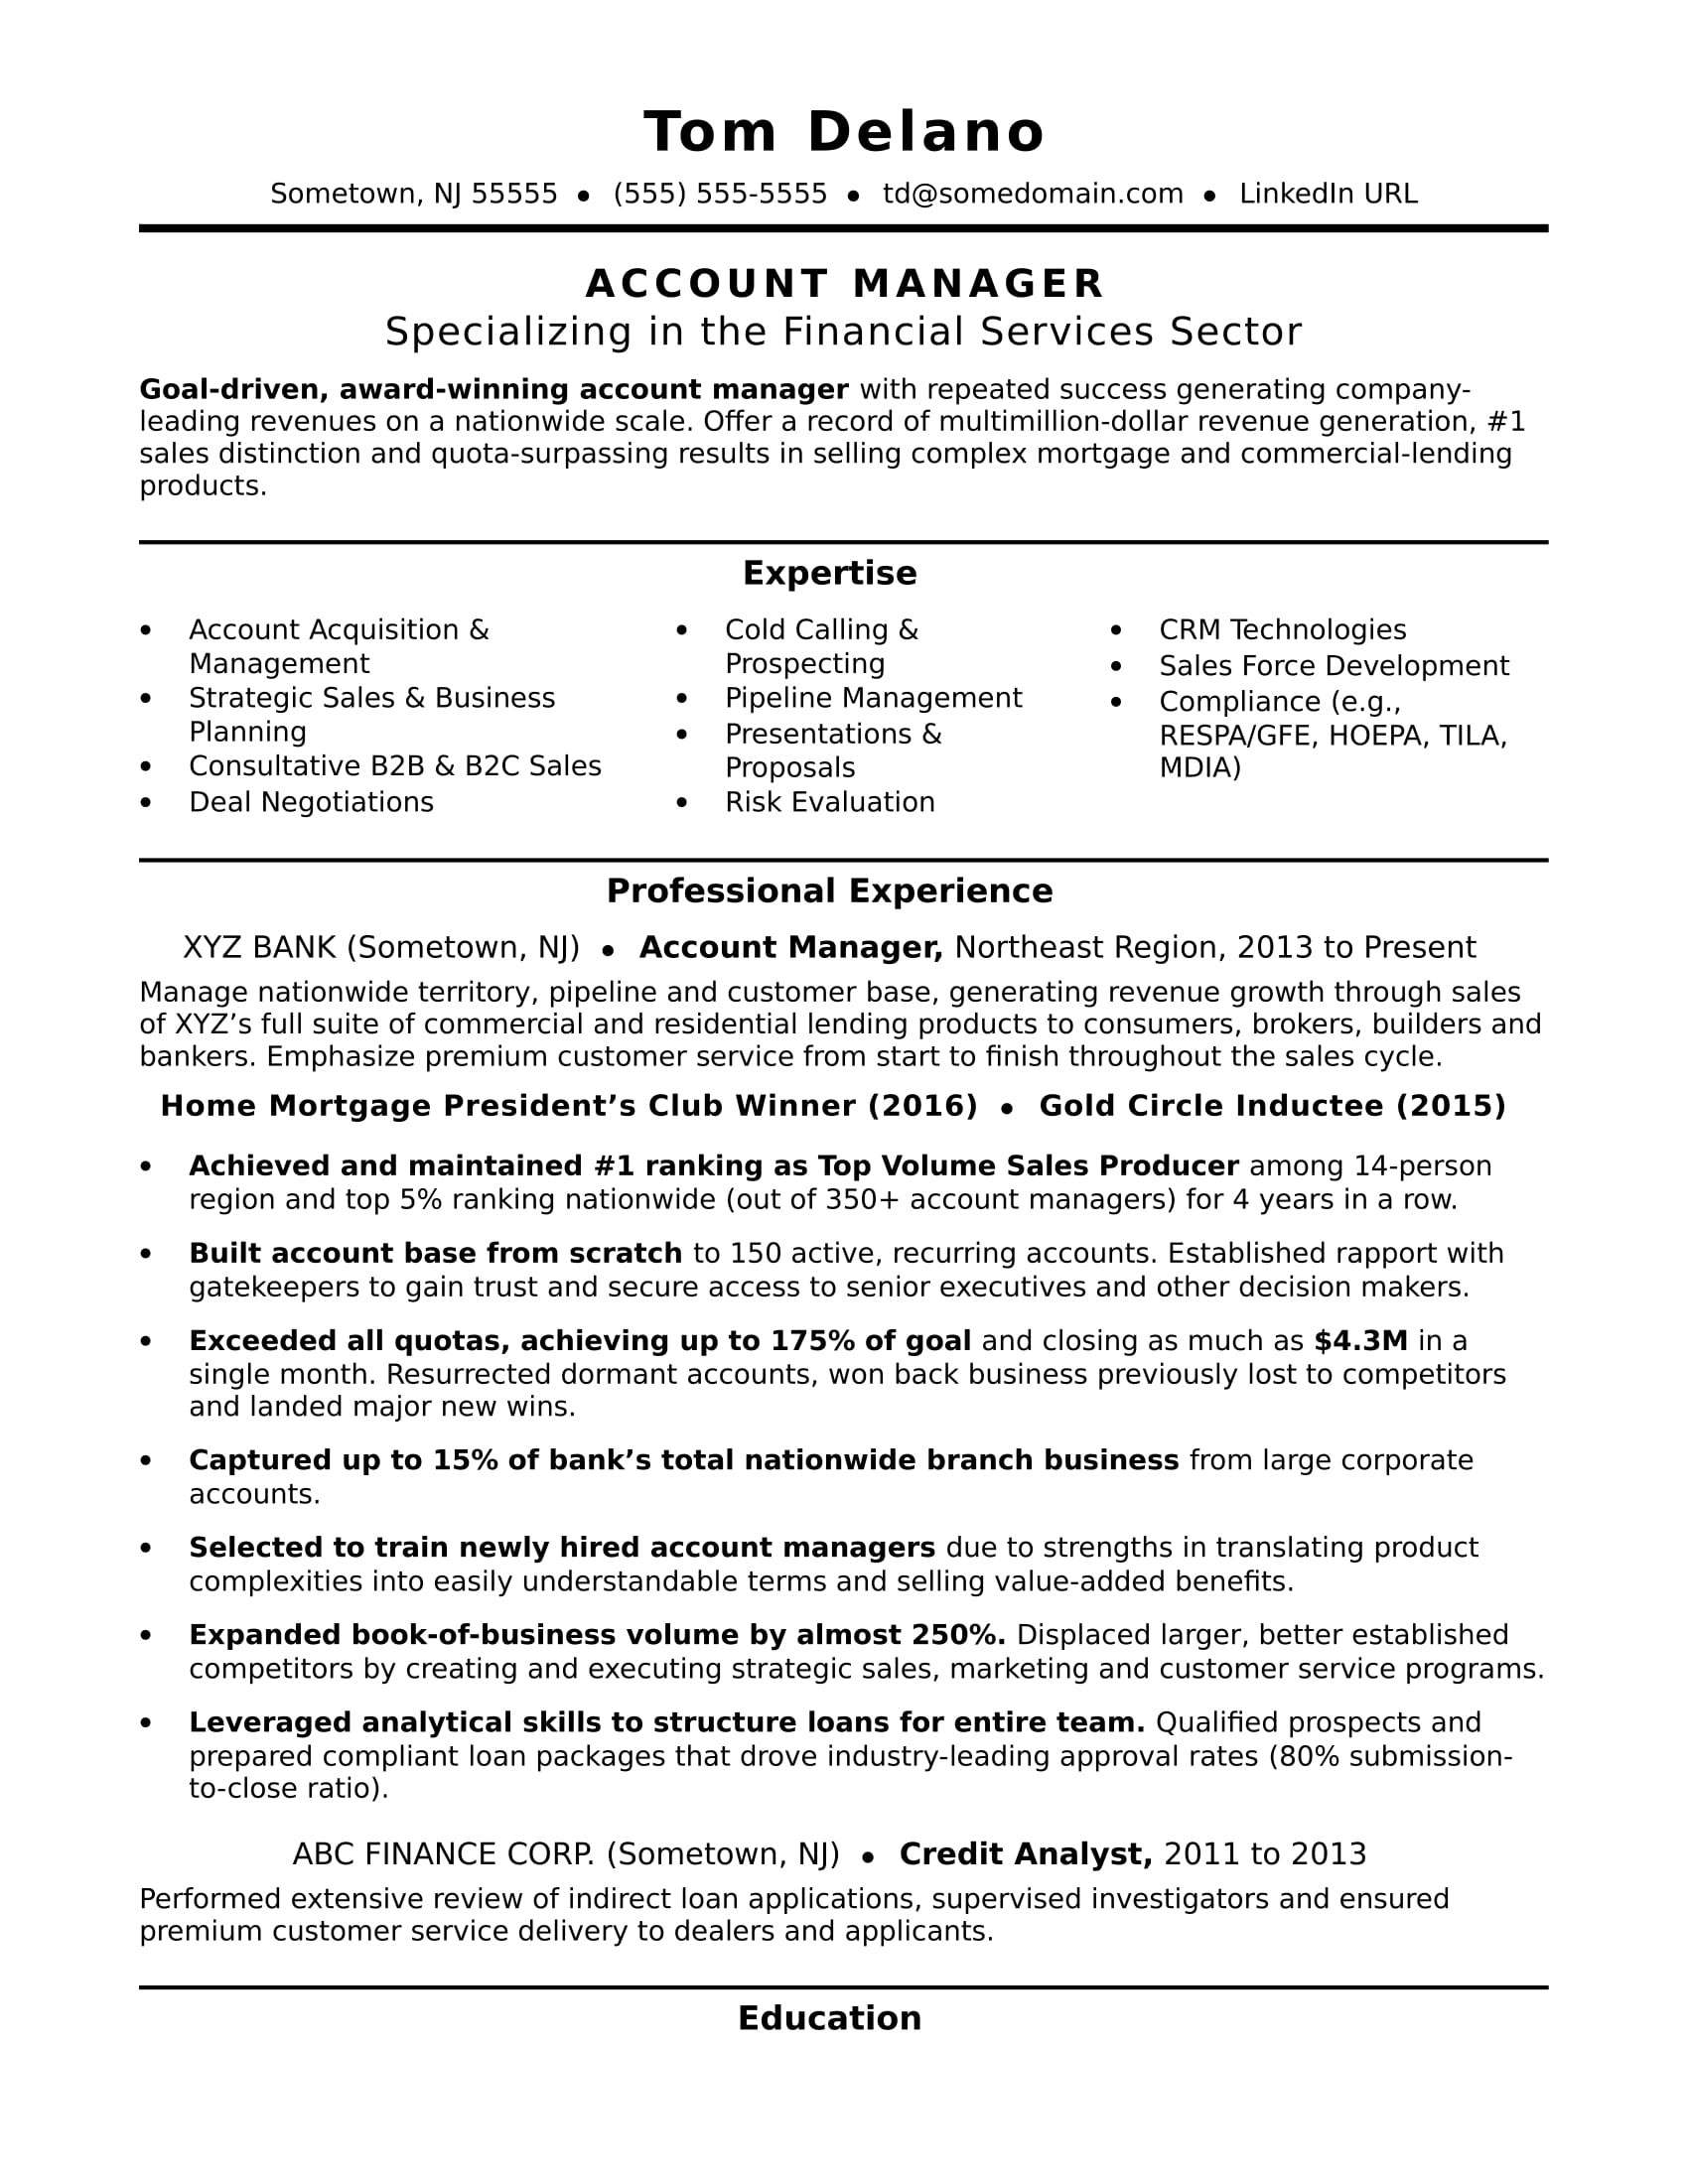 Resume Samples for Account Executive In Sales Account Manager Resume Monster.com